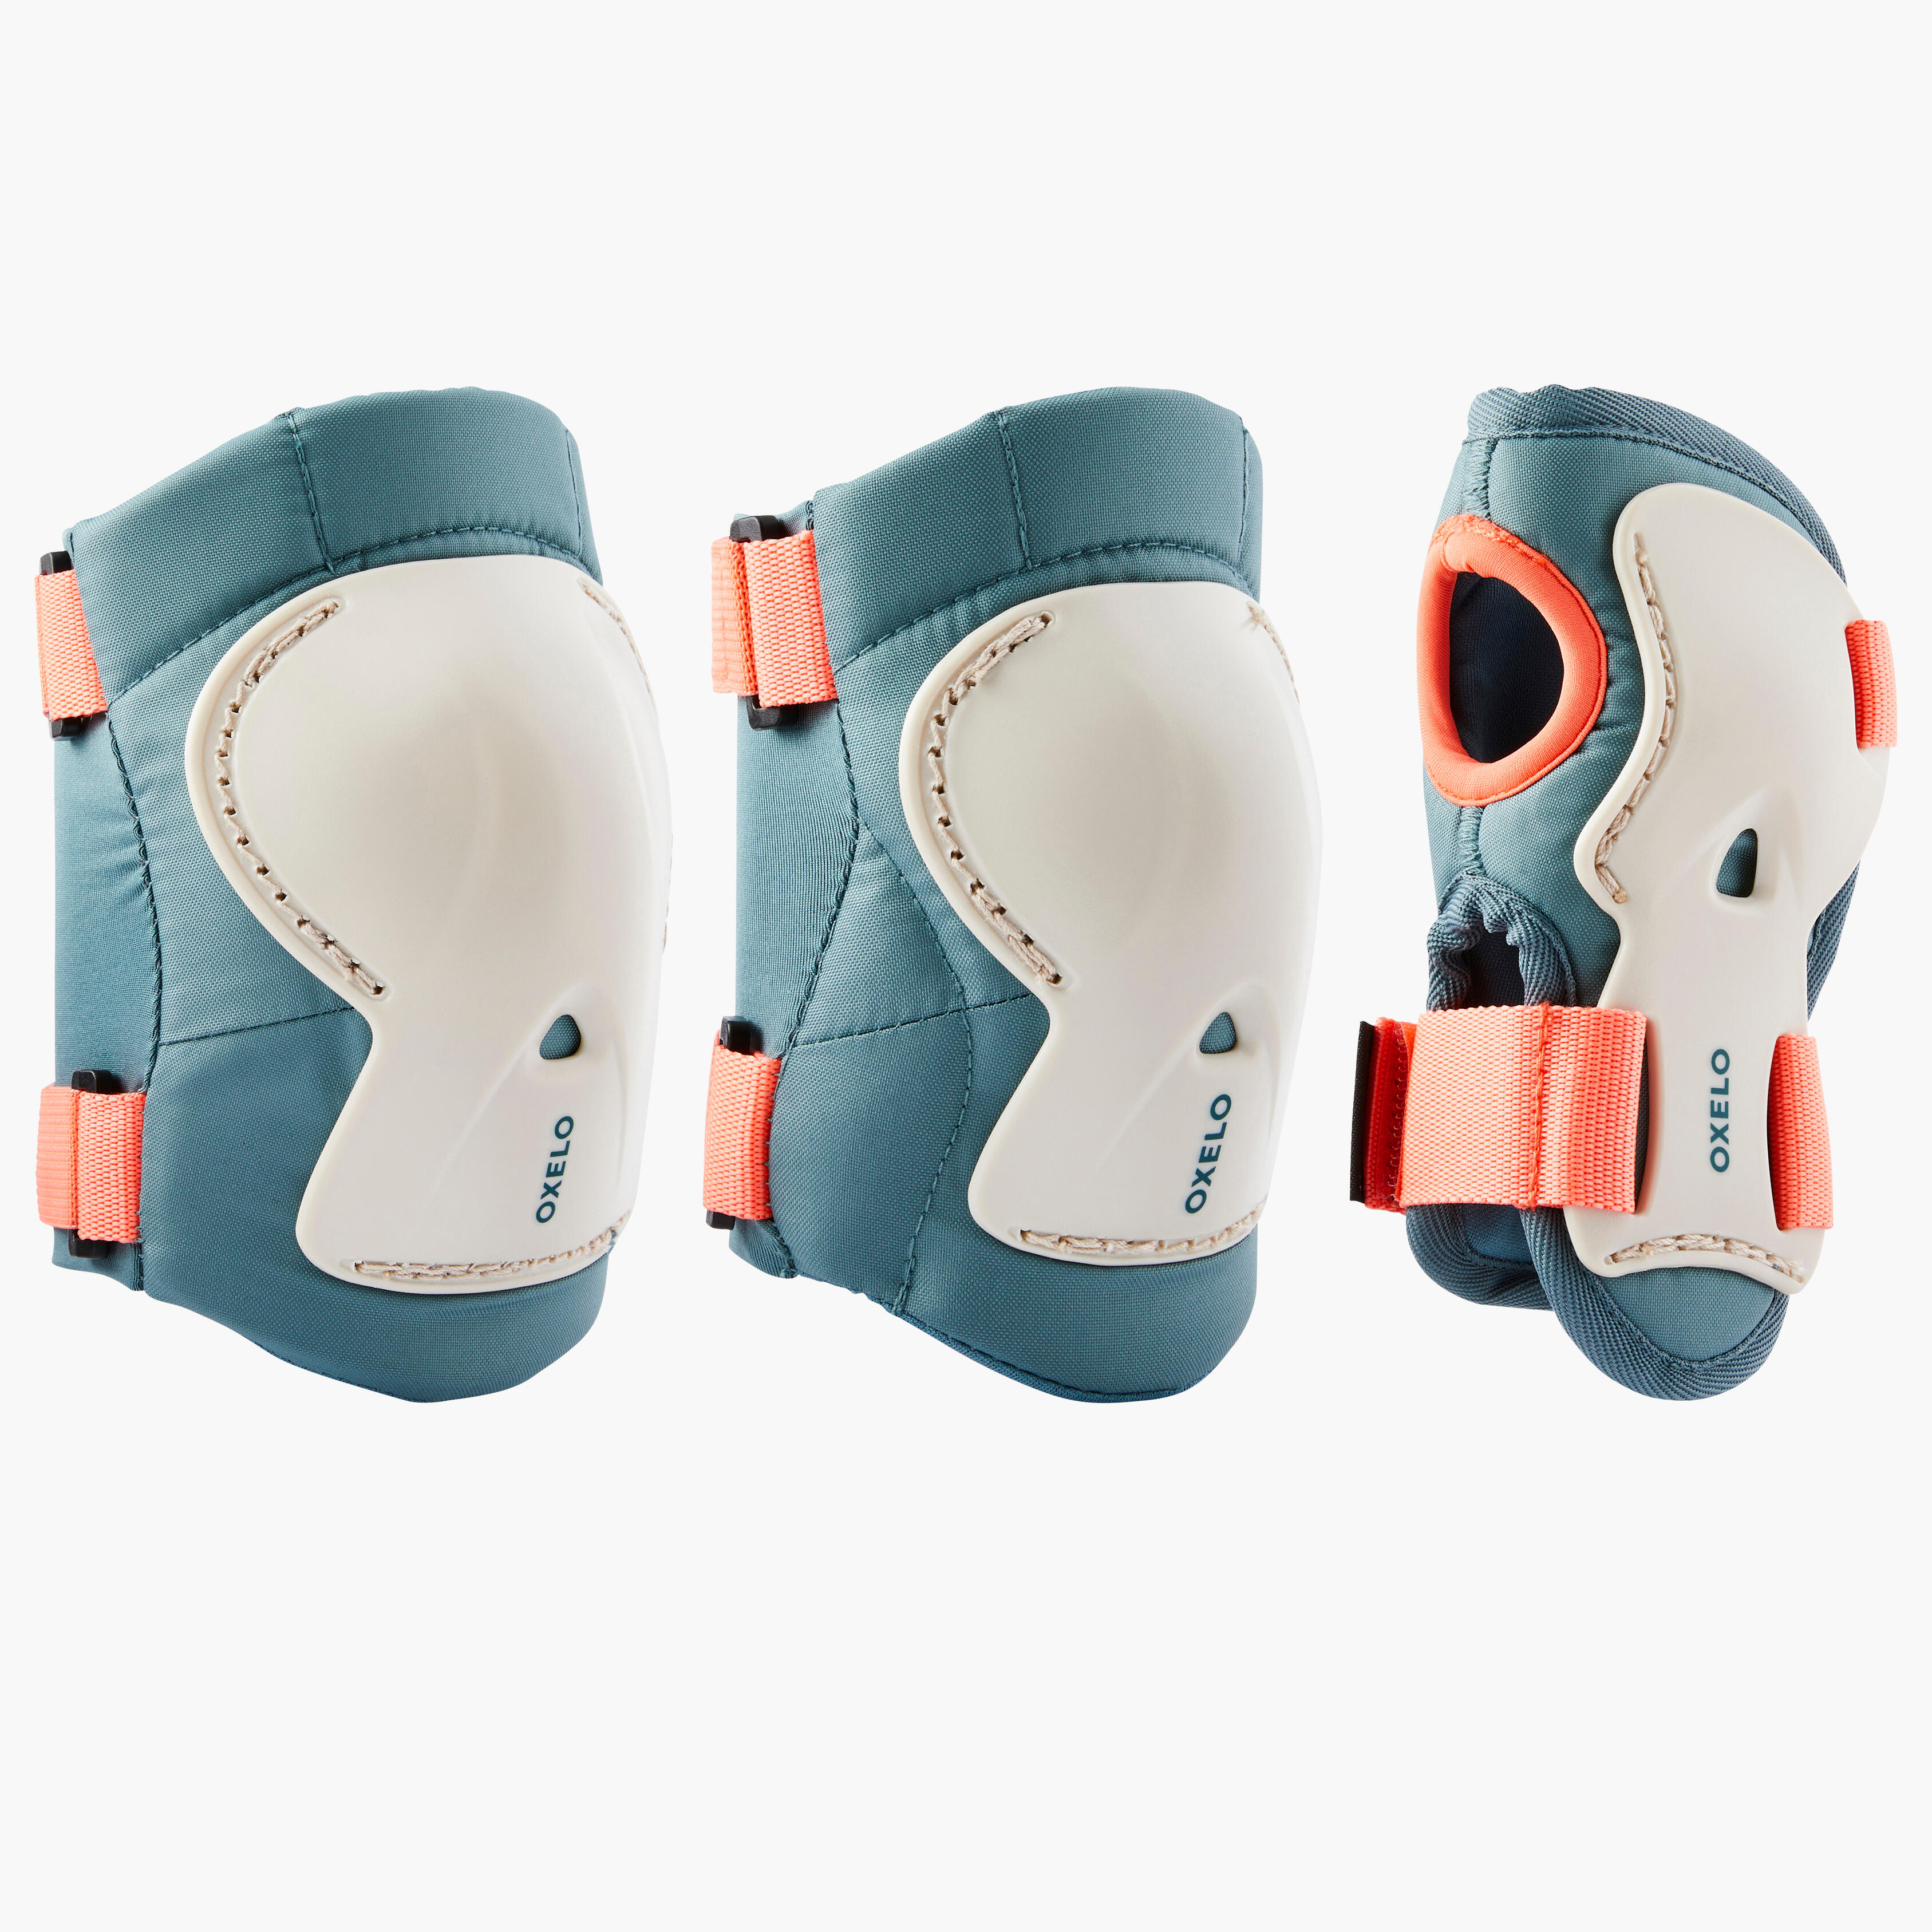 Kids' 3x2 Inline Skating/Scootering Protective Equipment